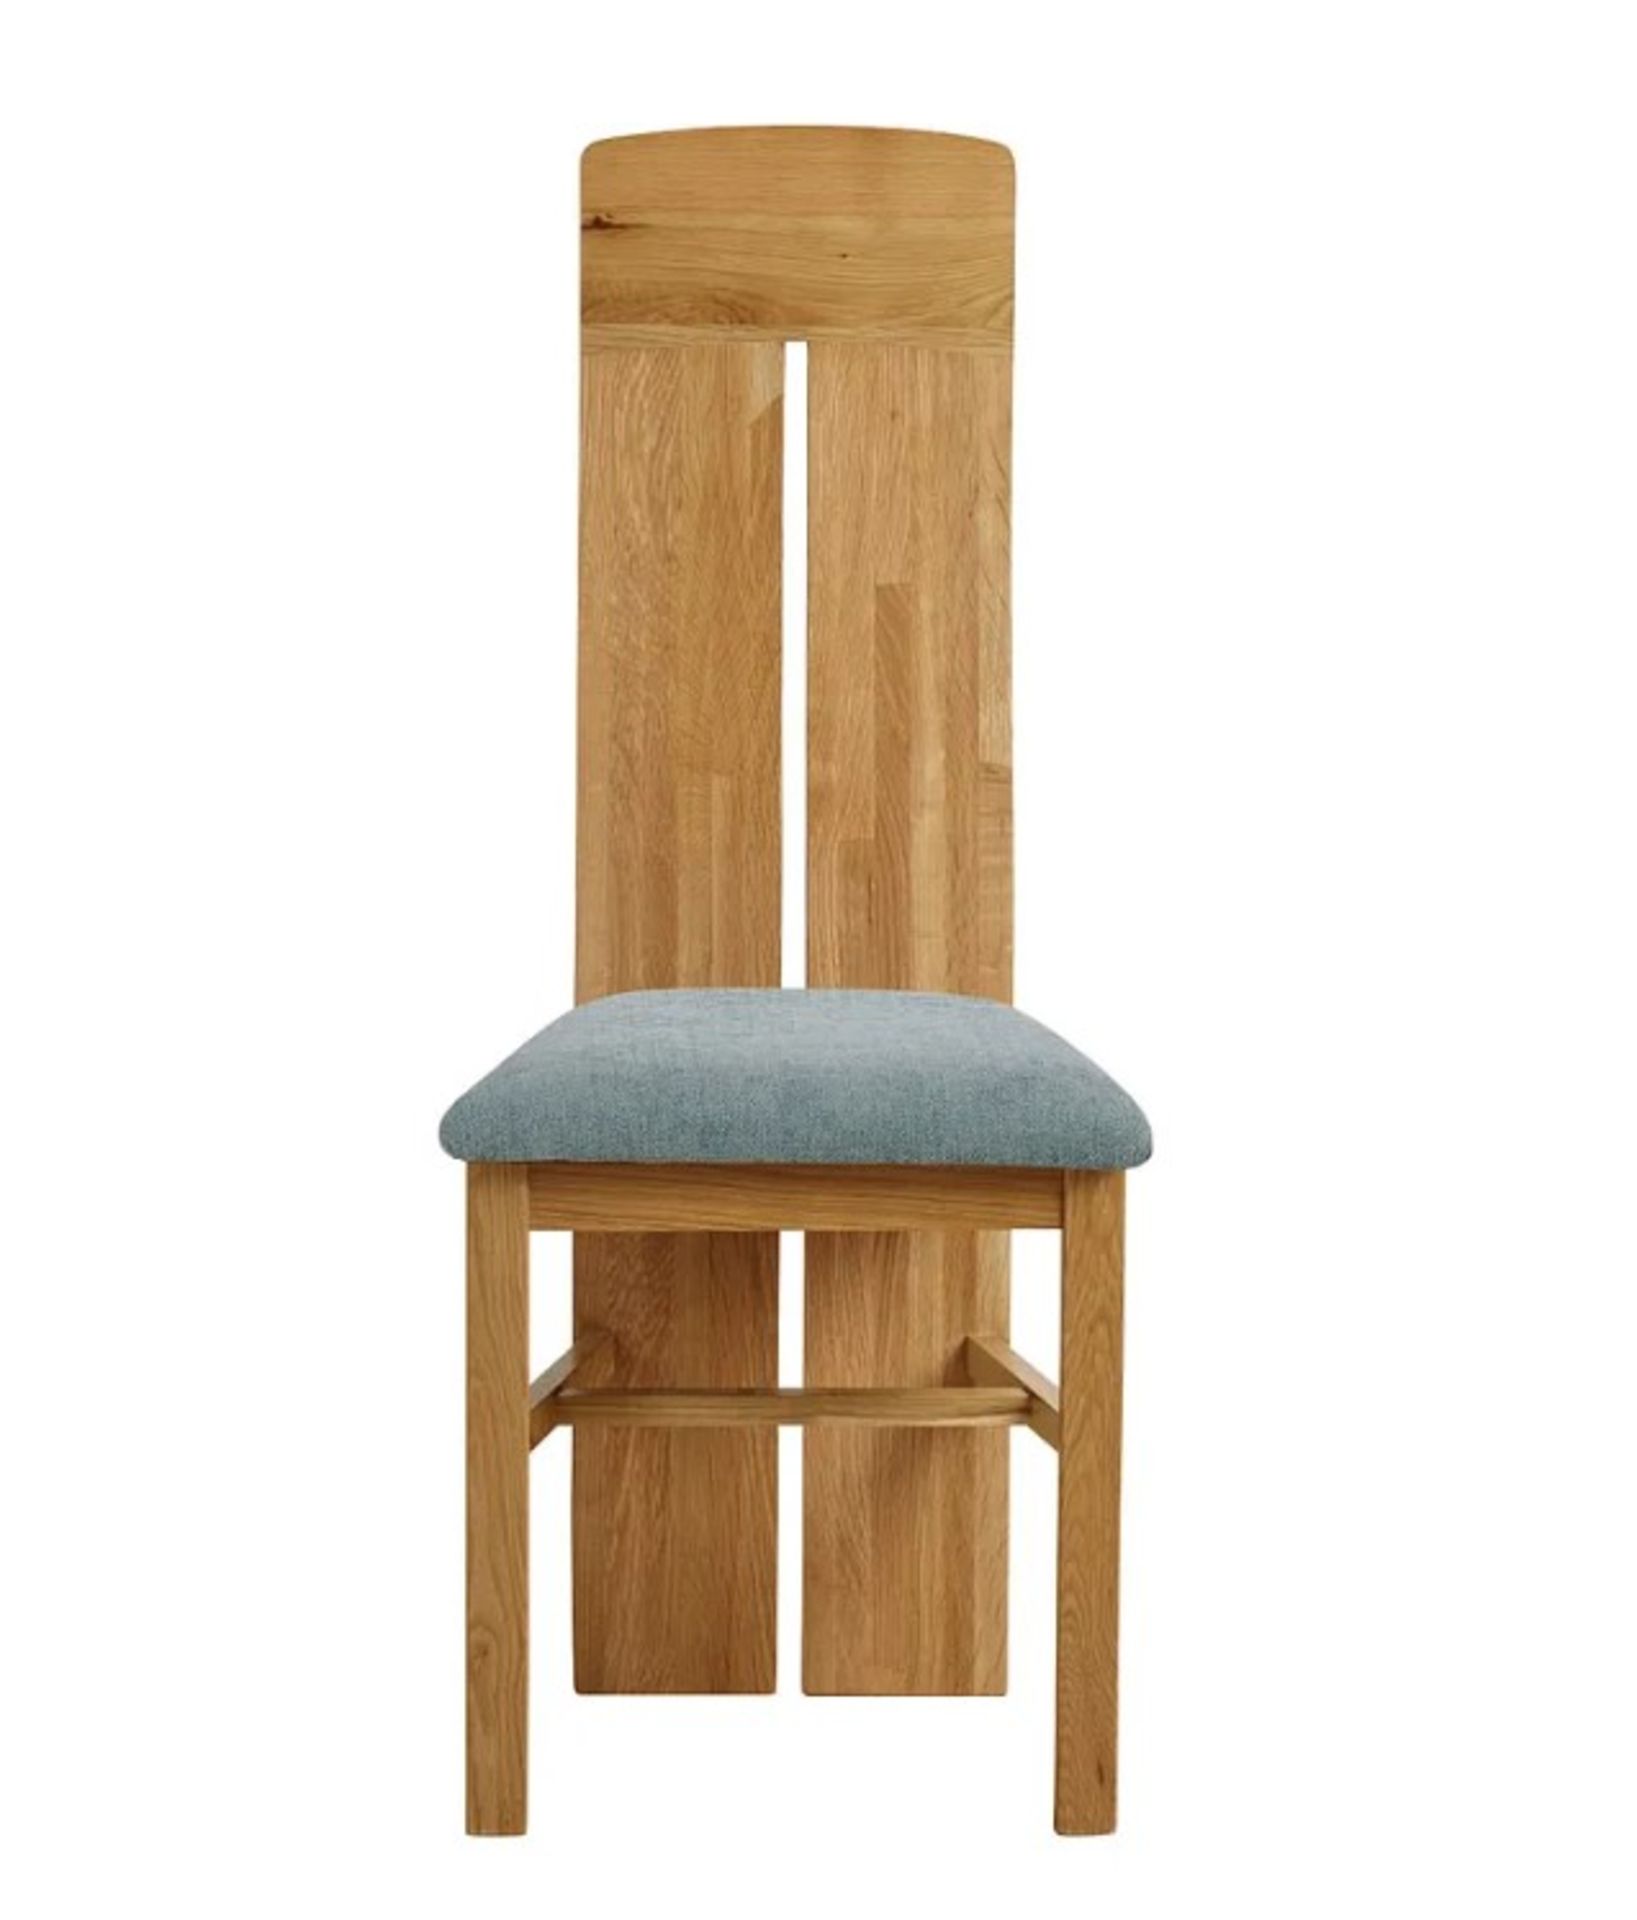 2 x Lily Natural Solid Oak Dining Chair With Sage Fabric Padding RRP £170 Each. (H107x W30x D42cm). - Image 2 of 14